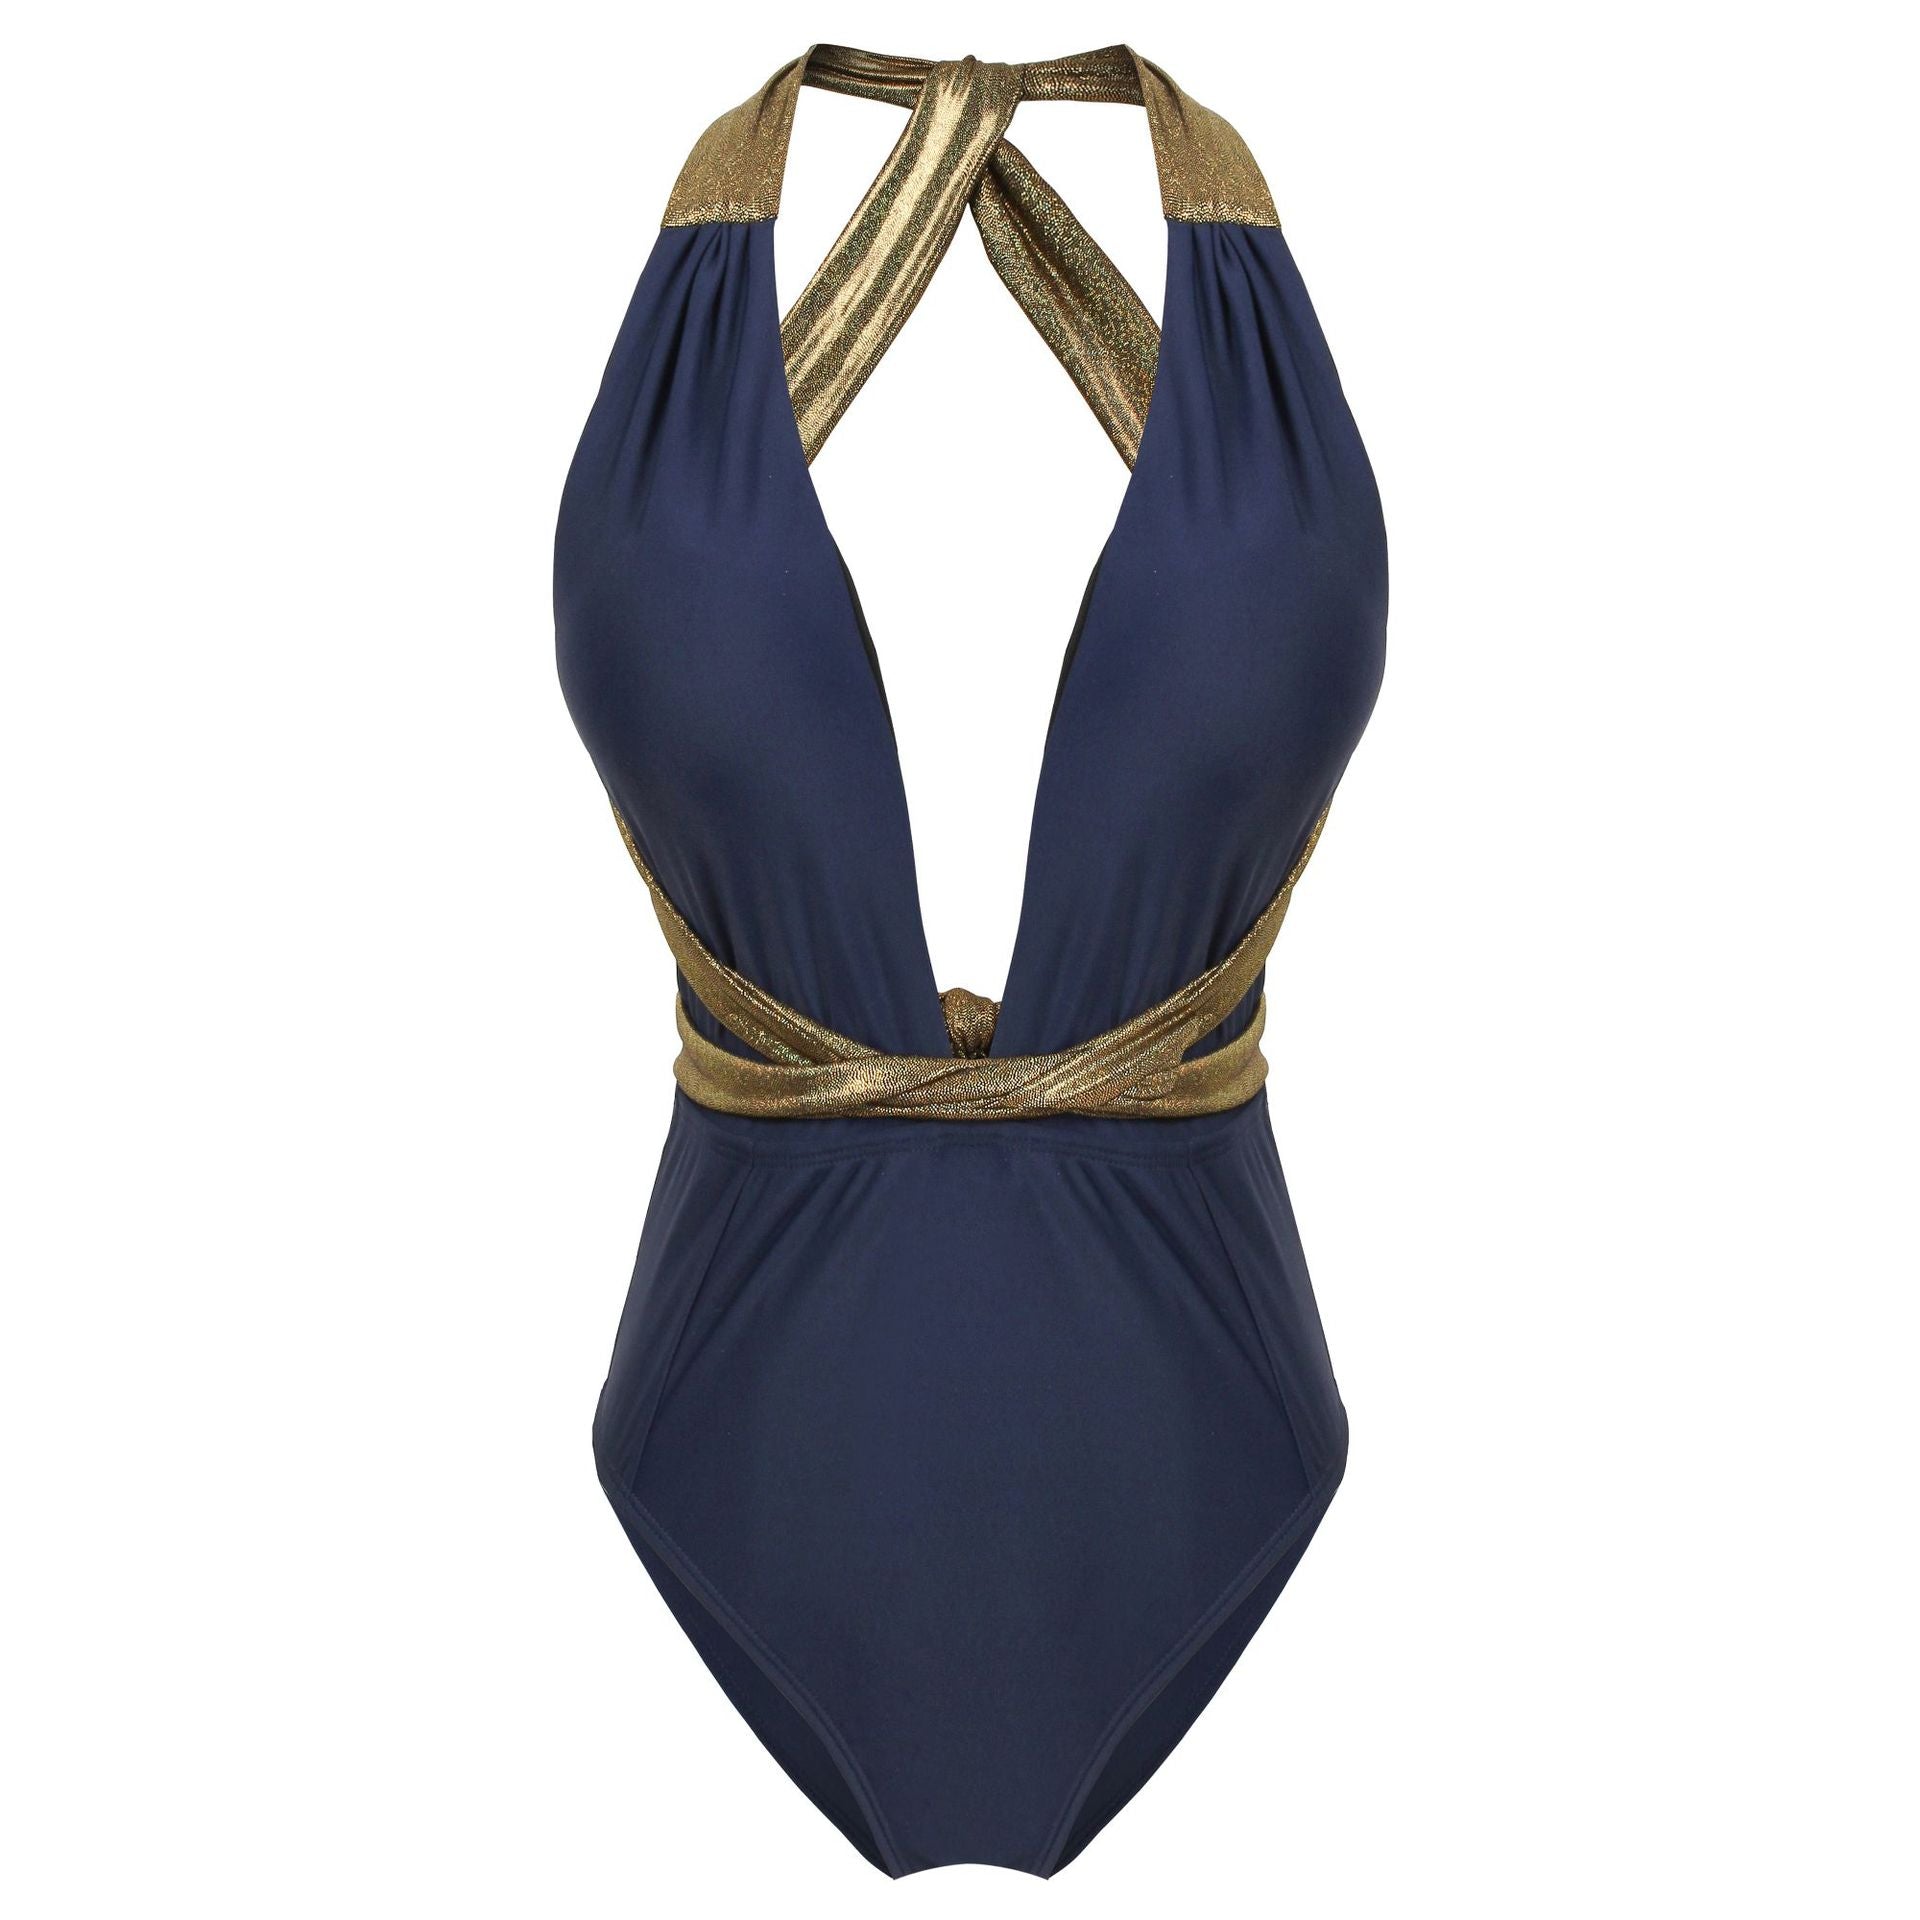 Hollow One Piece Swimsuit - Classic chic